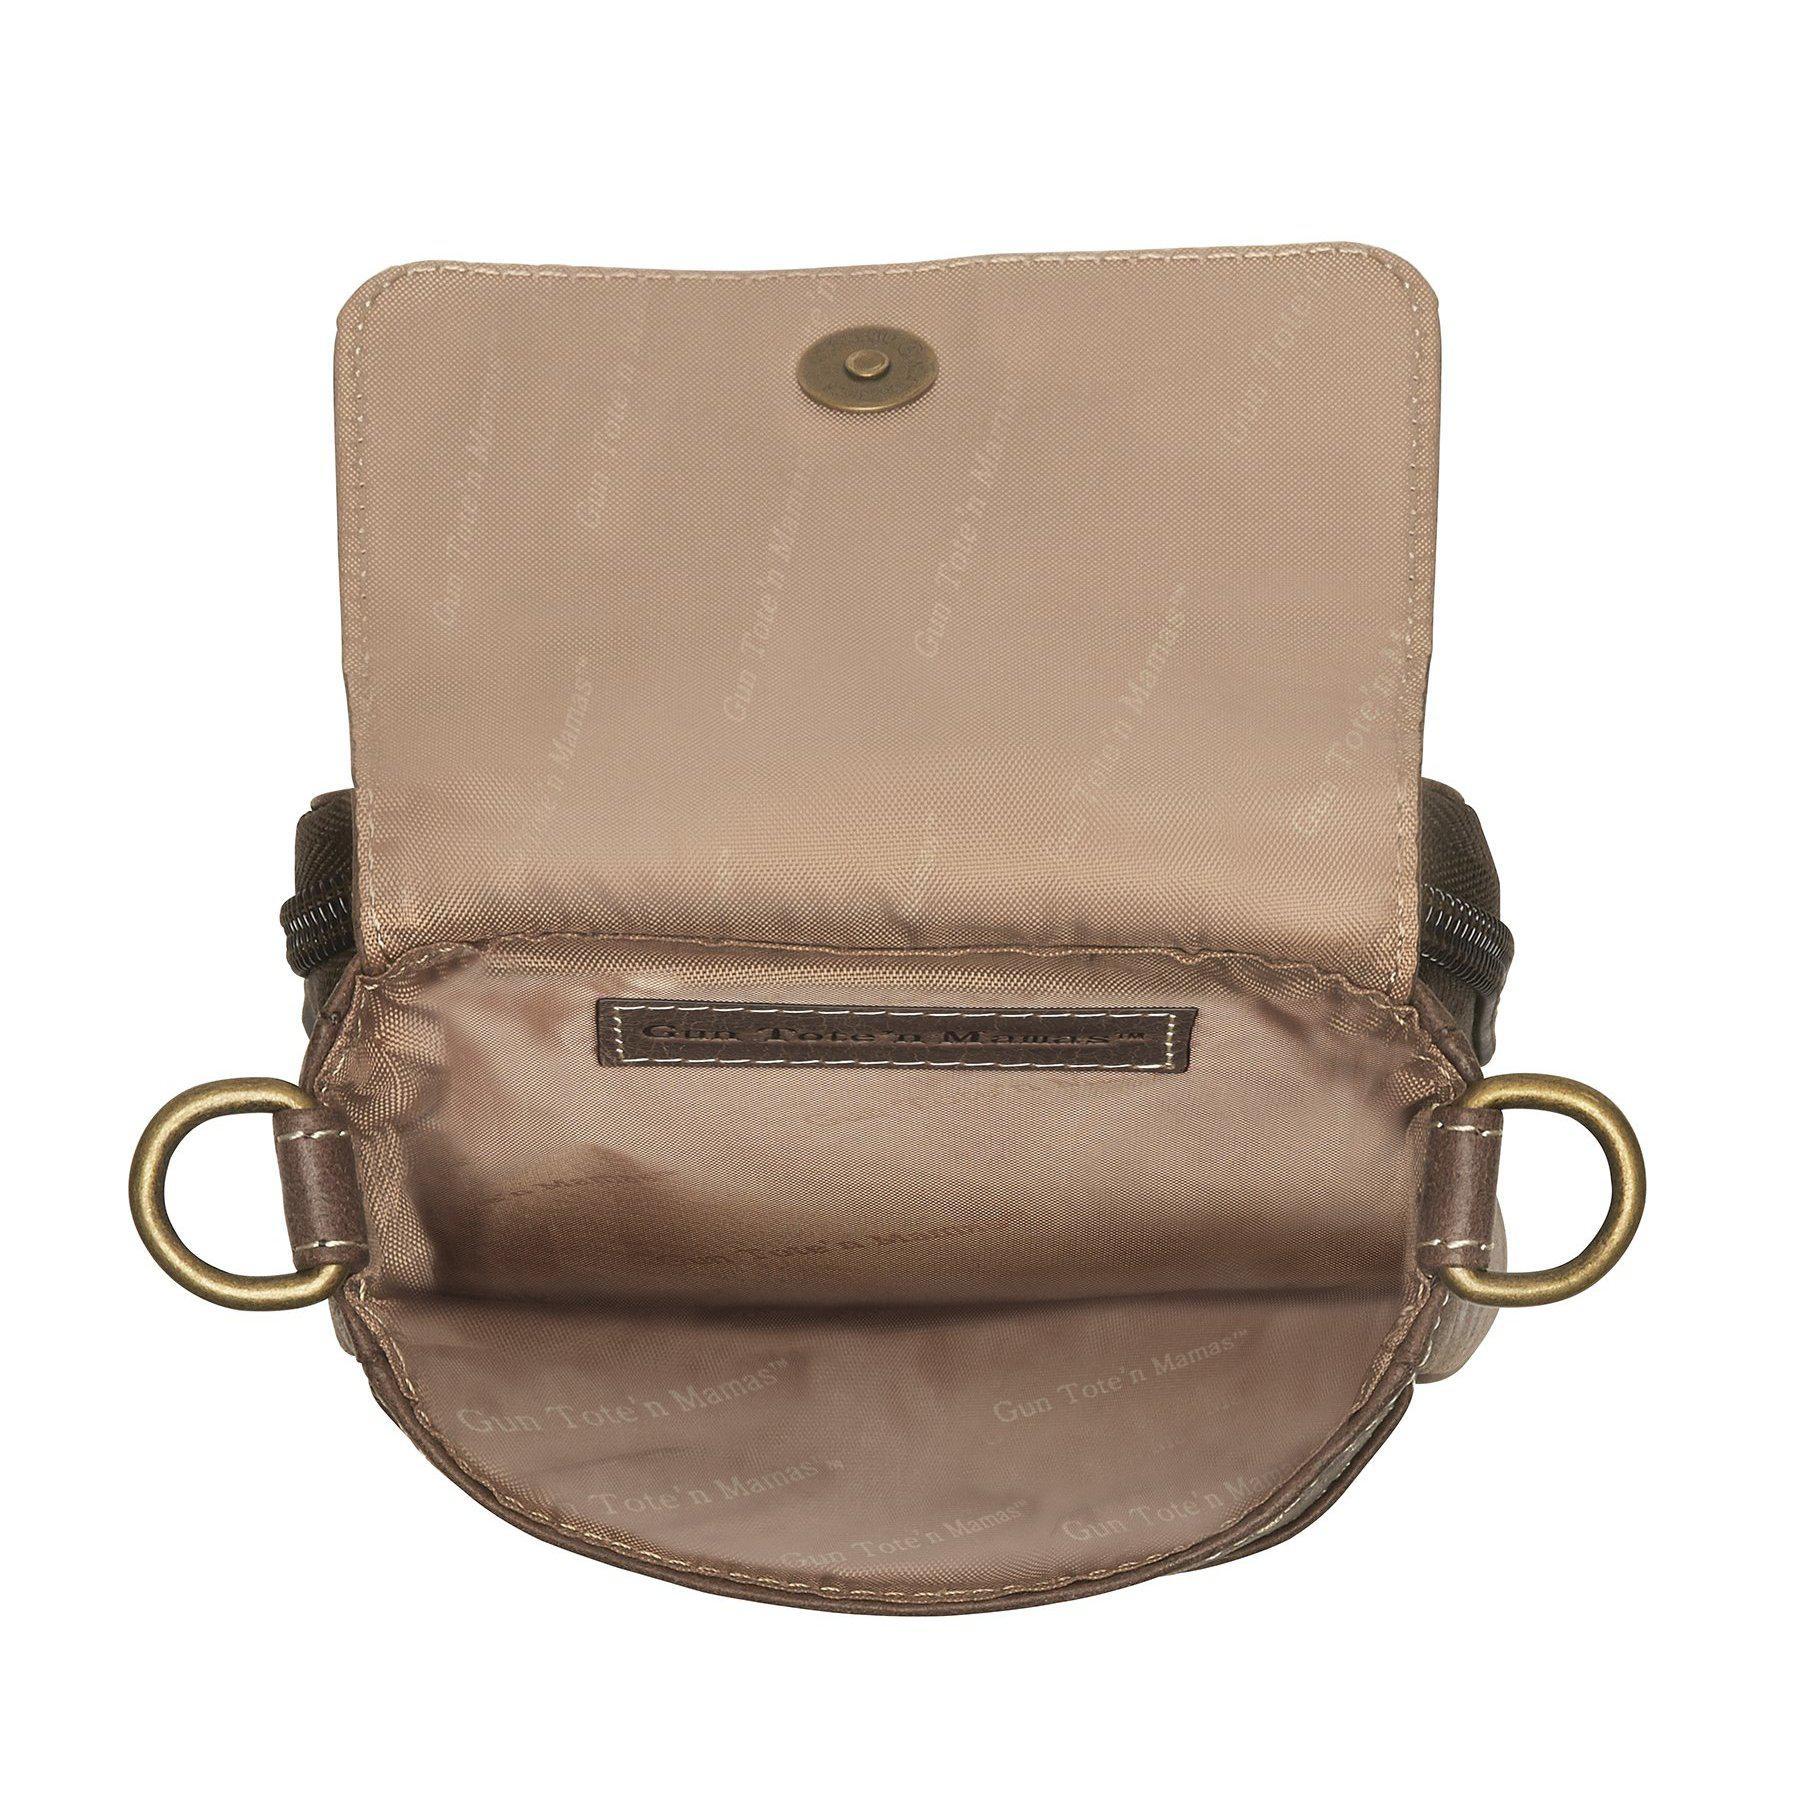 Carry your phone in style with a Casey Cellphone Crossbody by Haute Shore